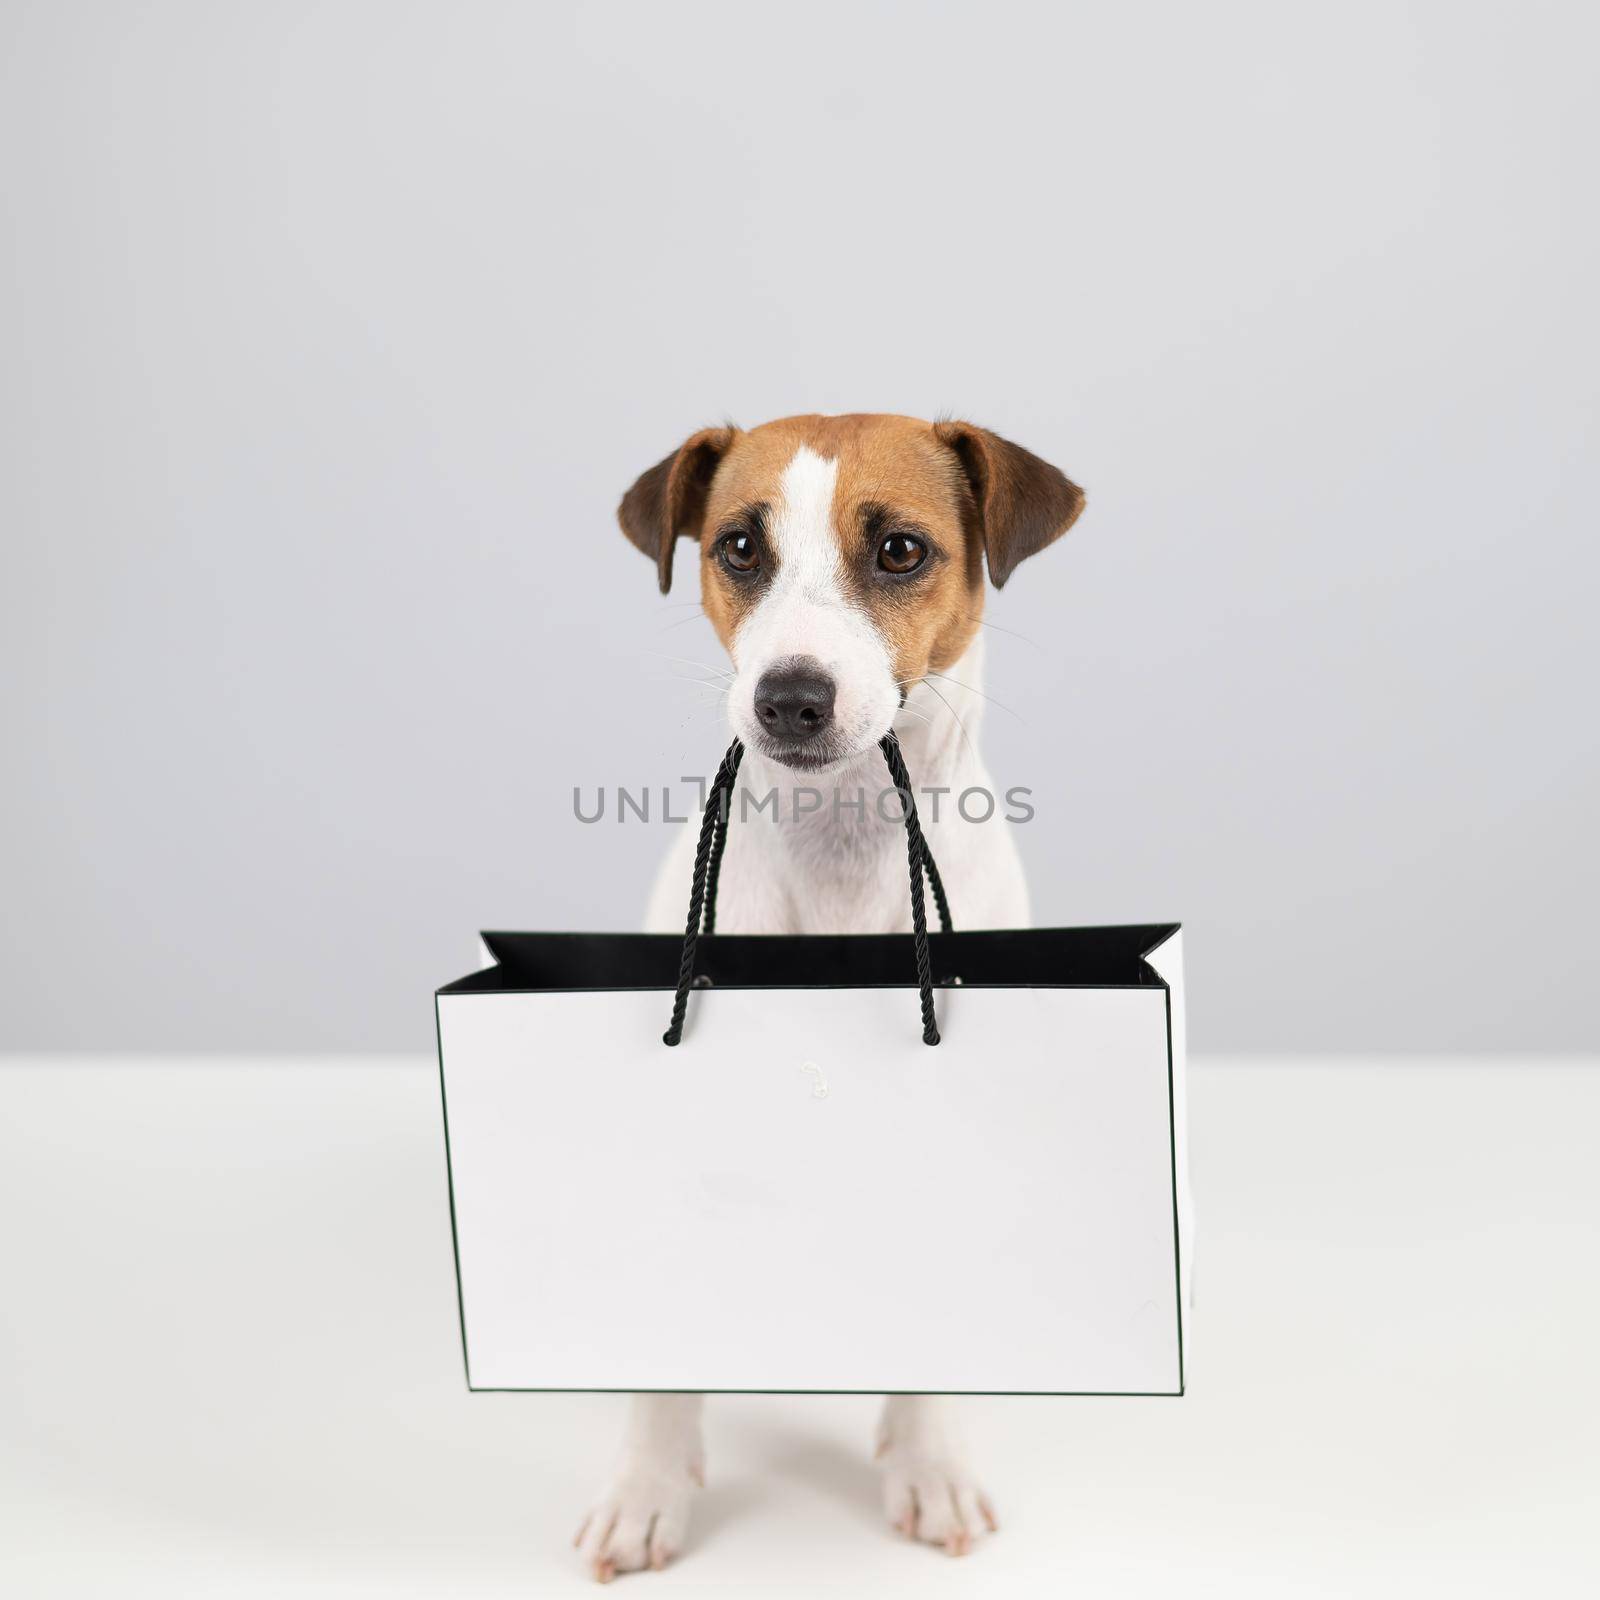 Jack russell terrier dog holding a paper bag on a white background. Shopping. by mrwed54